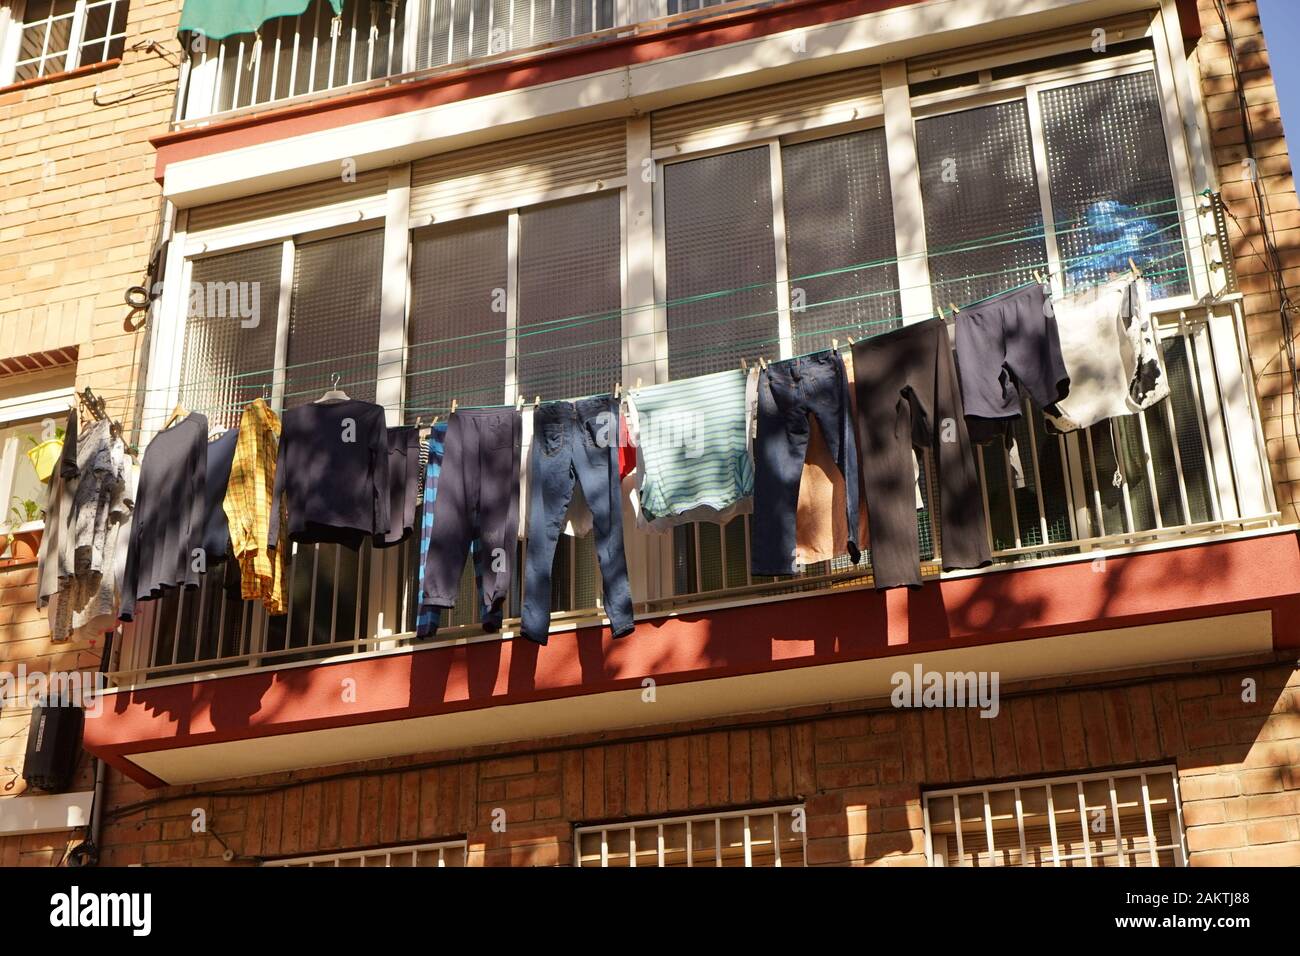 laundry hanging out to dry on an apartment enclosed balcony Stock Photo